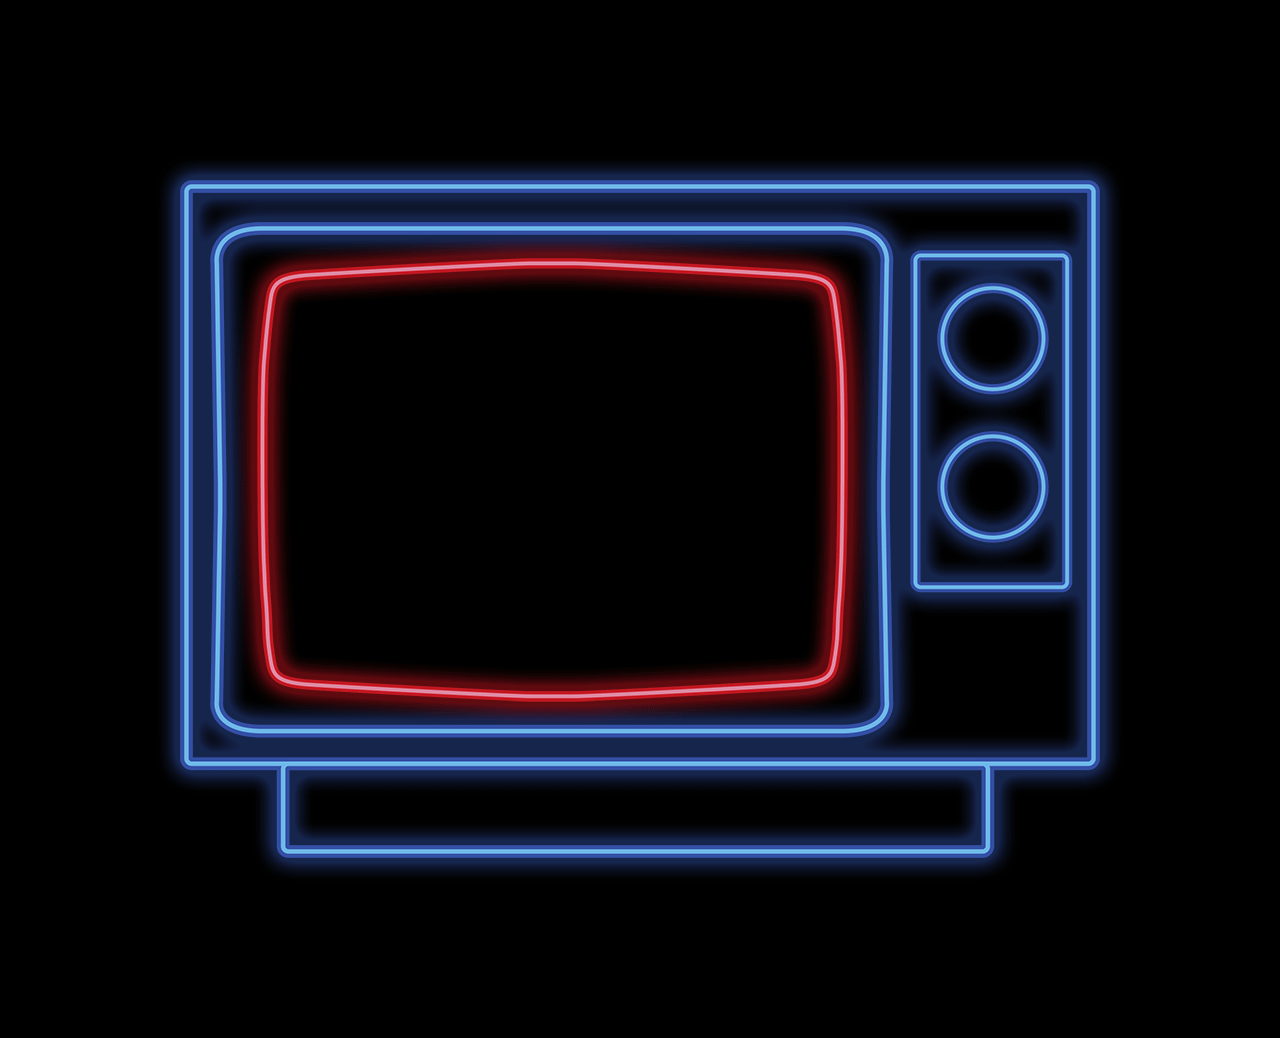  Tv  neon glow GIF Find on GIFER